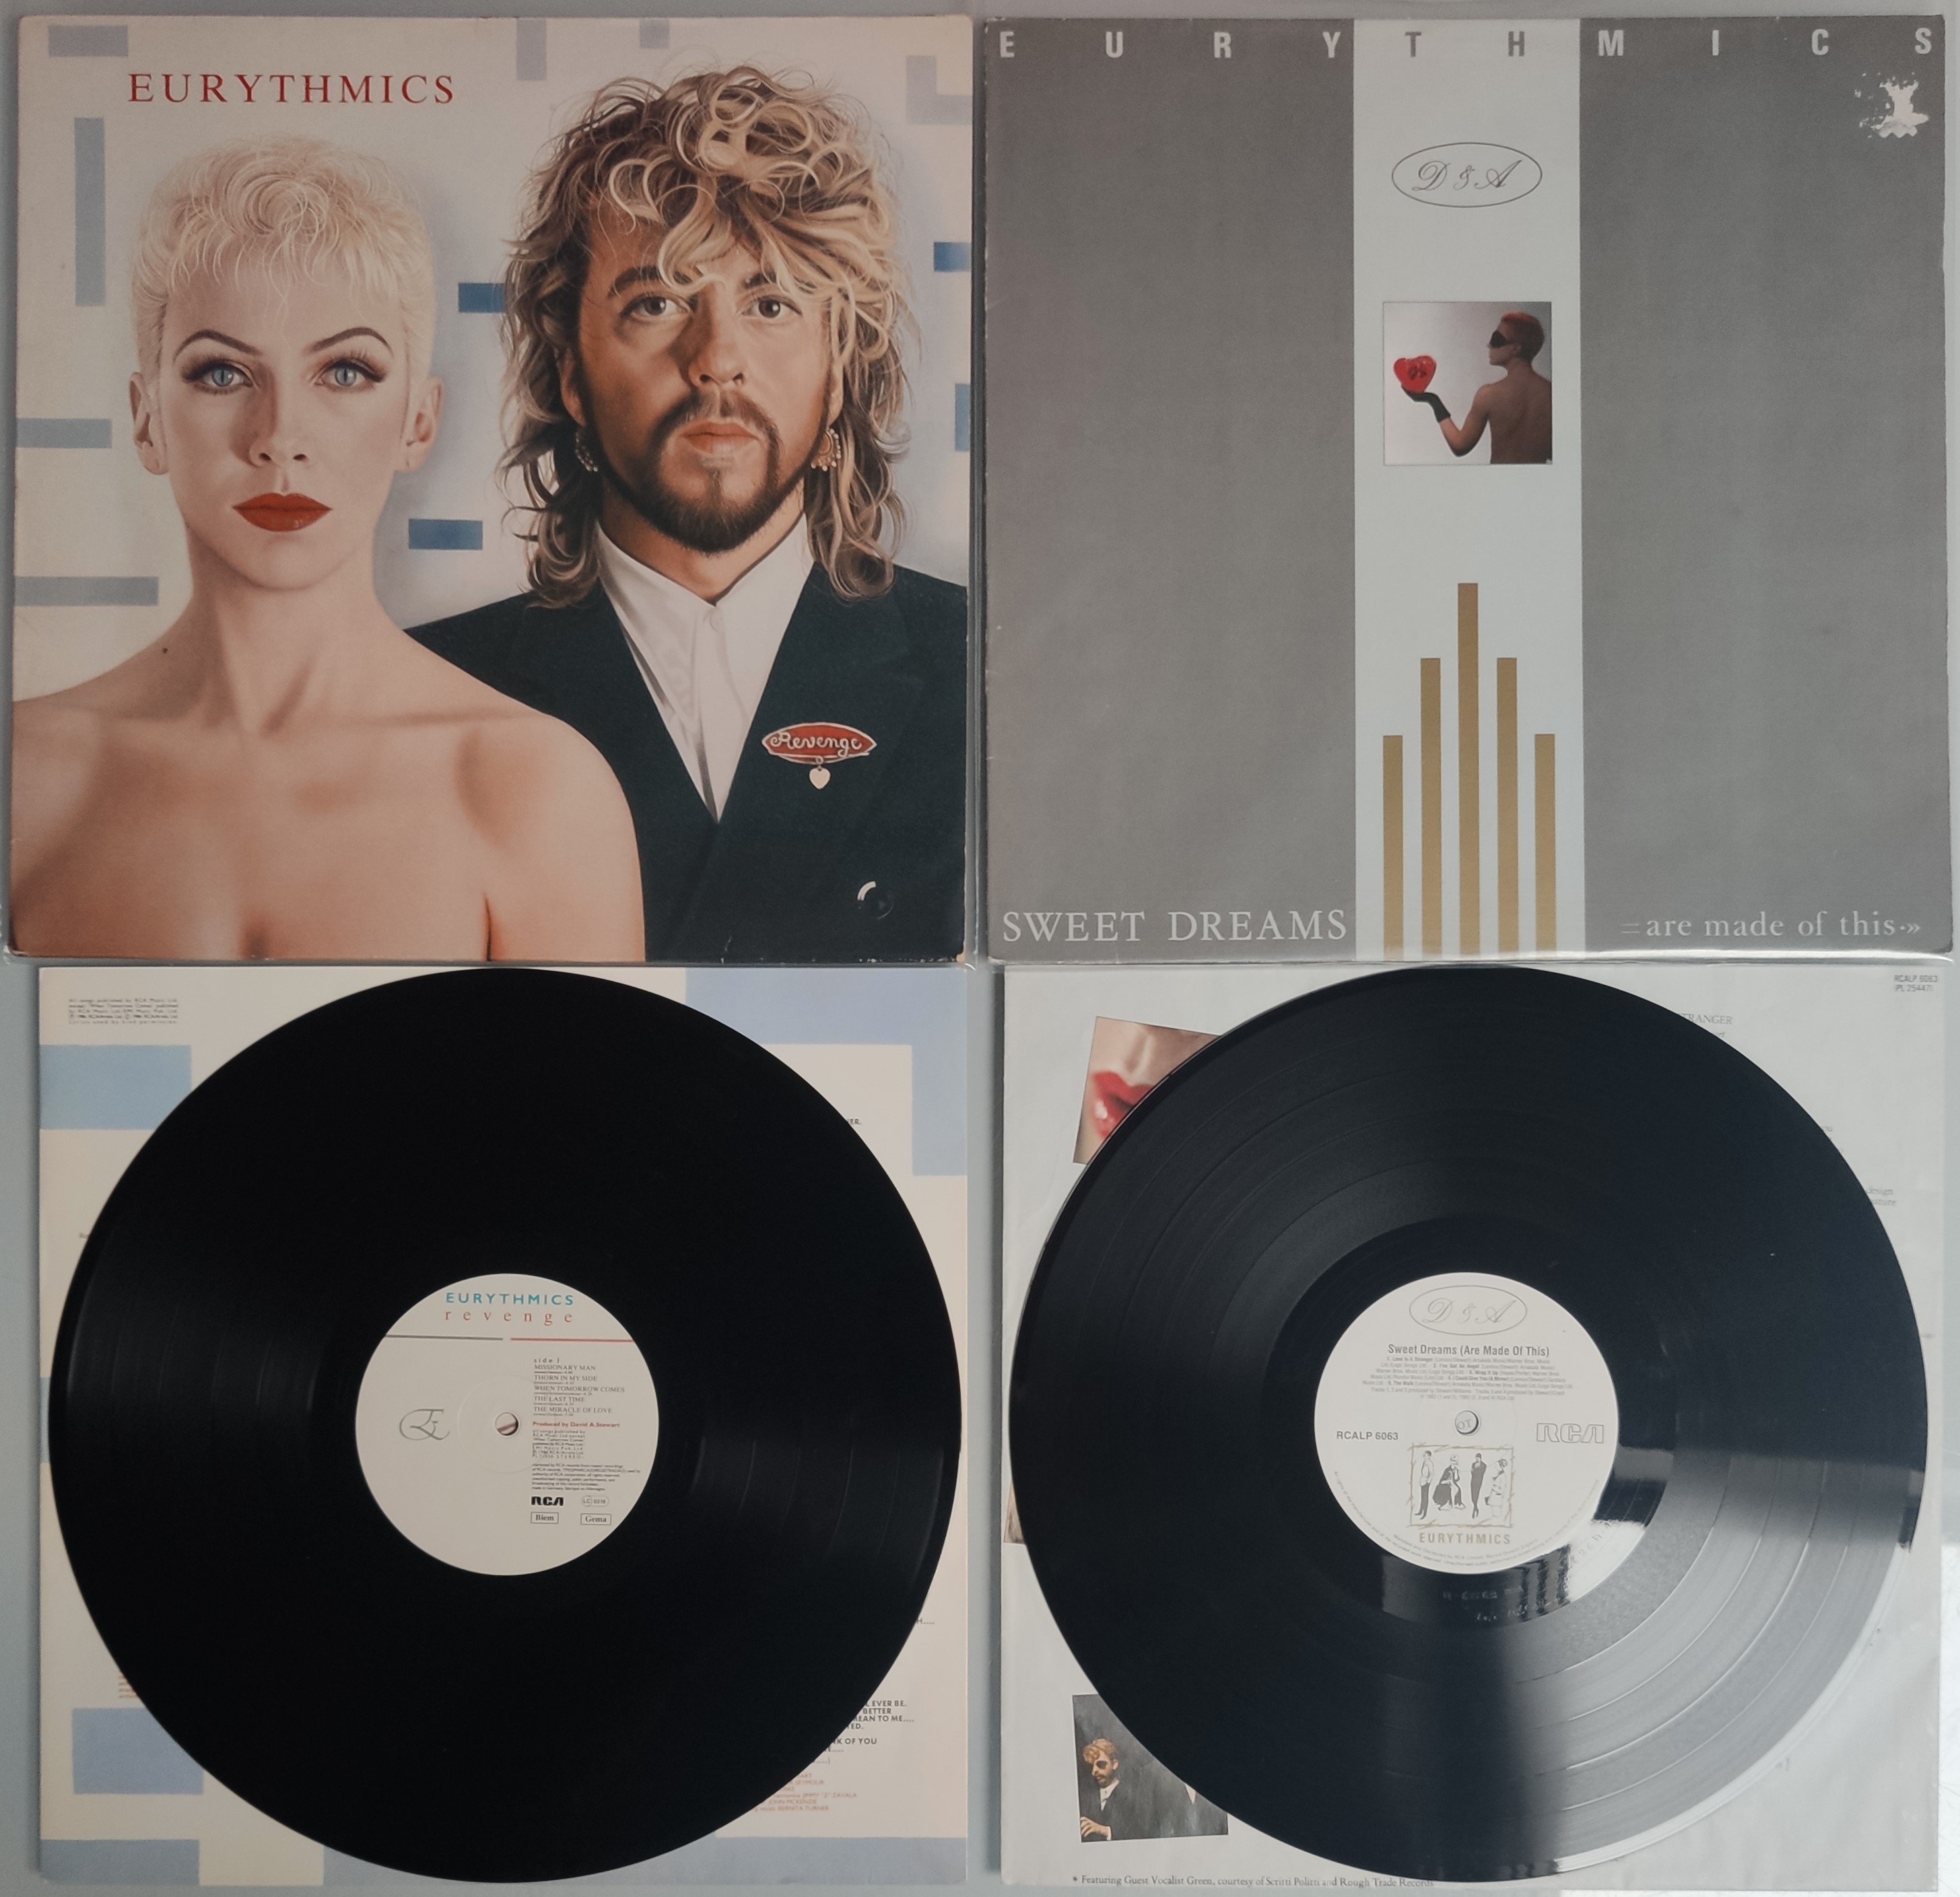 A Collection of 12 x Eurythmics / Annie Lennox New Wave Vinyl LPs and 12” Single. - Image 6 of 9